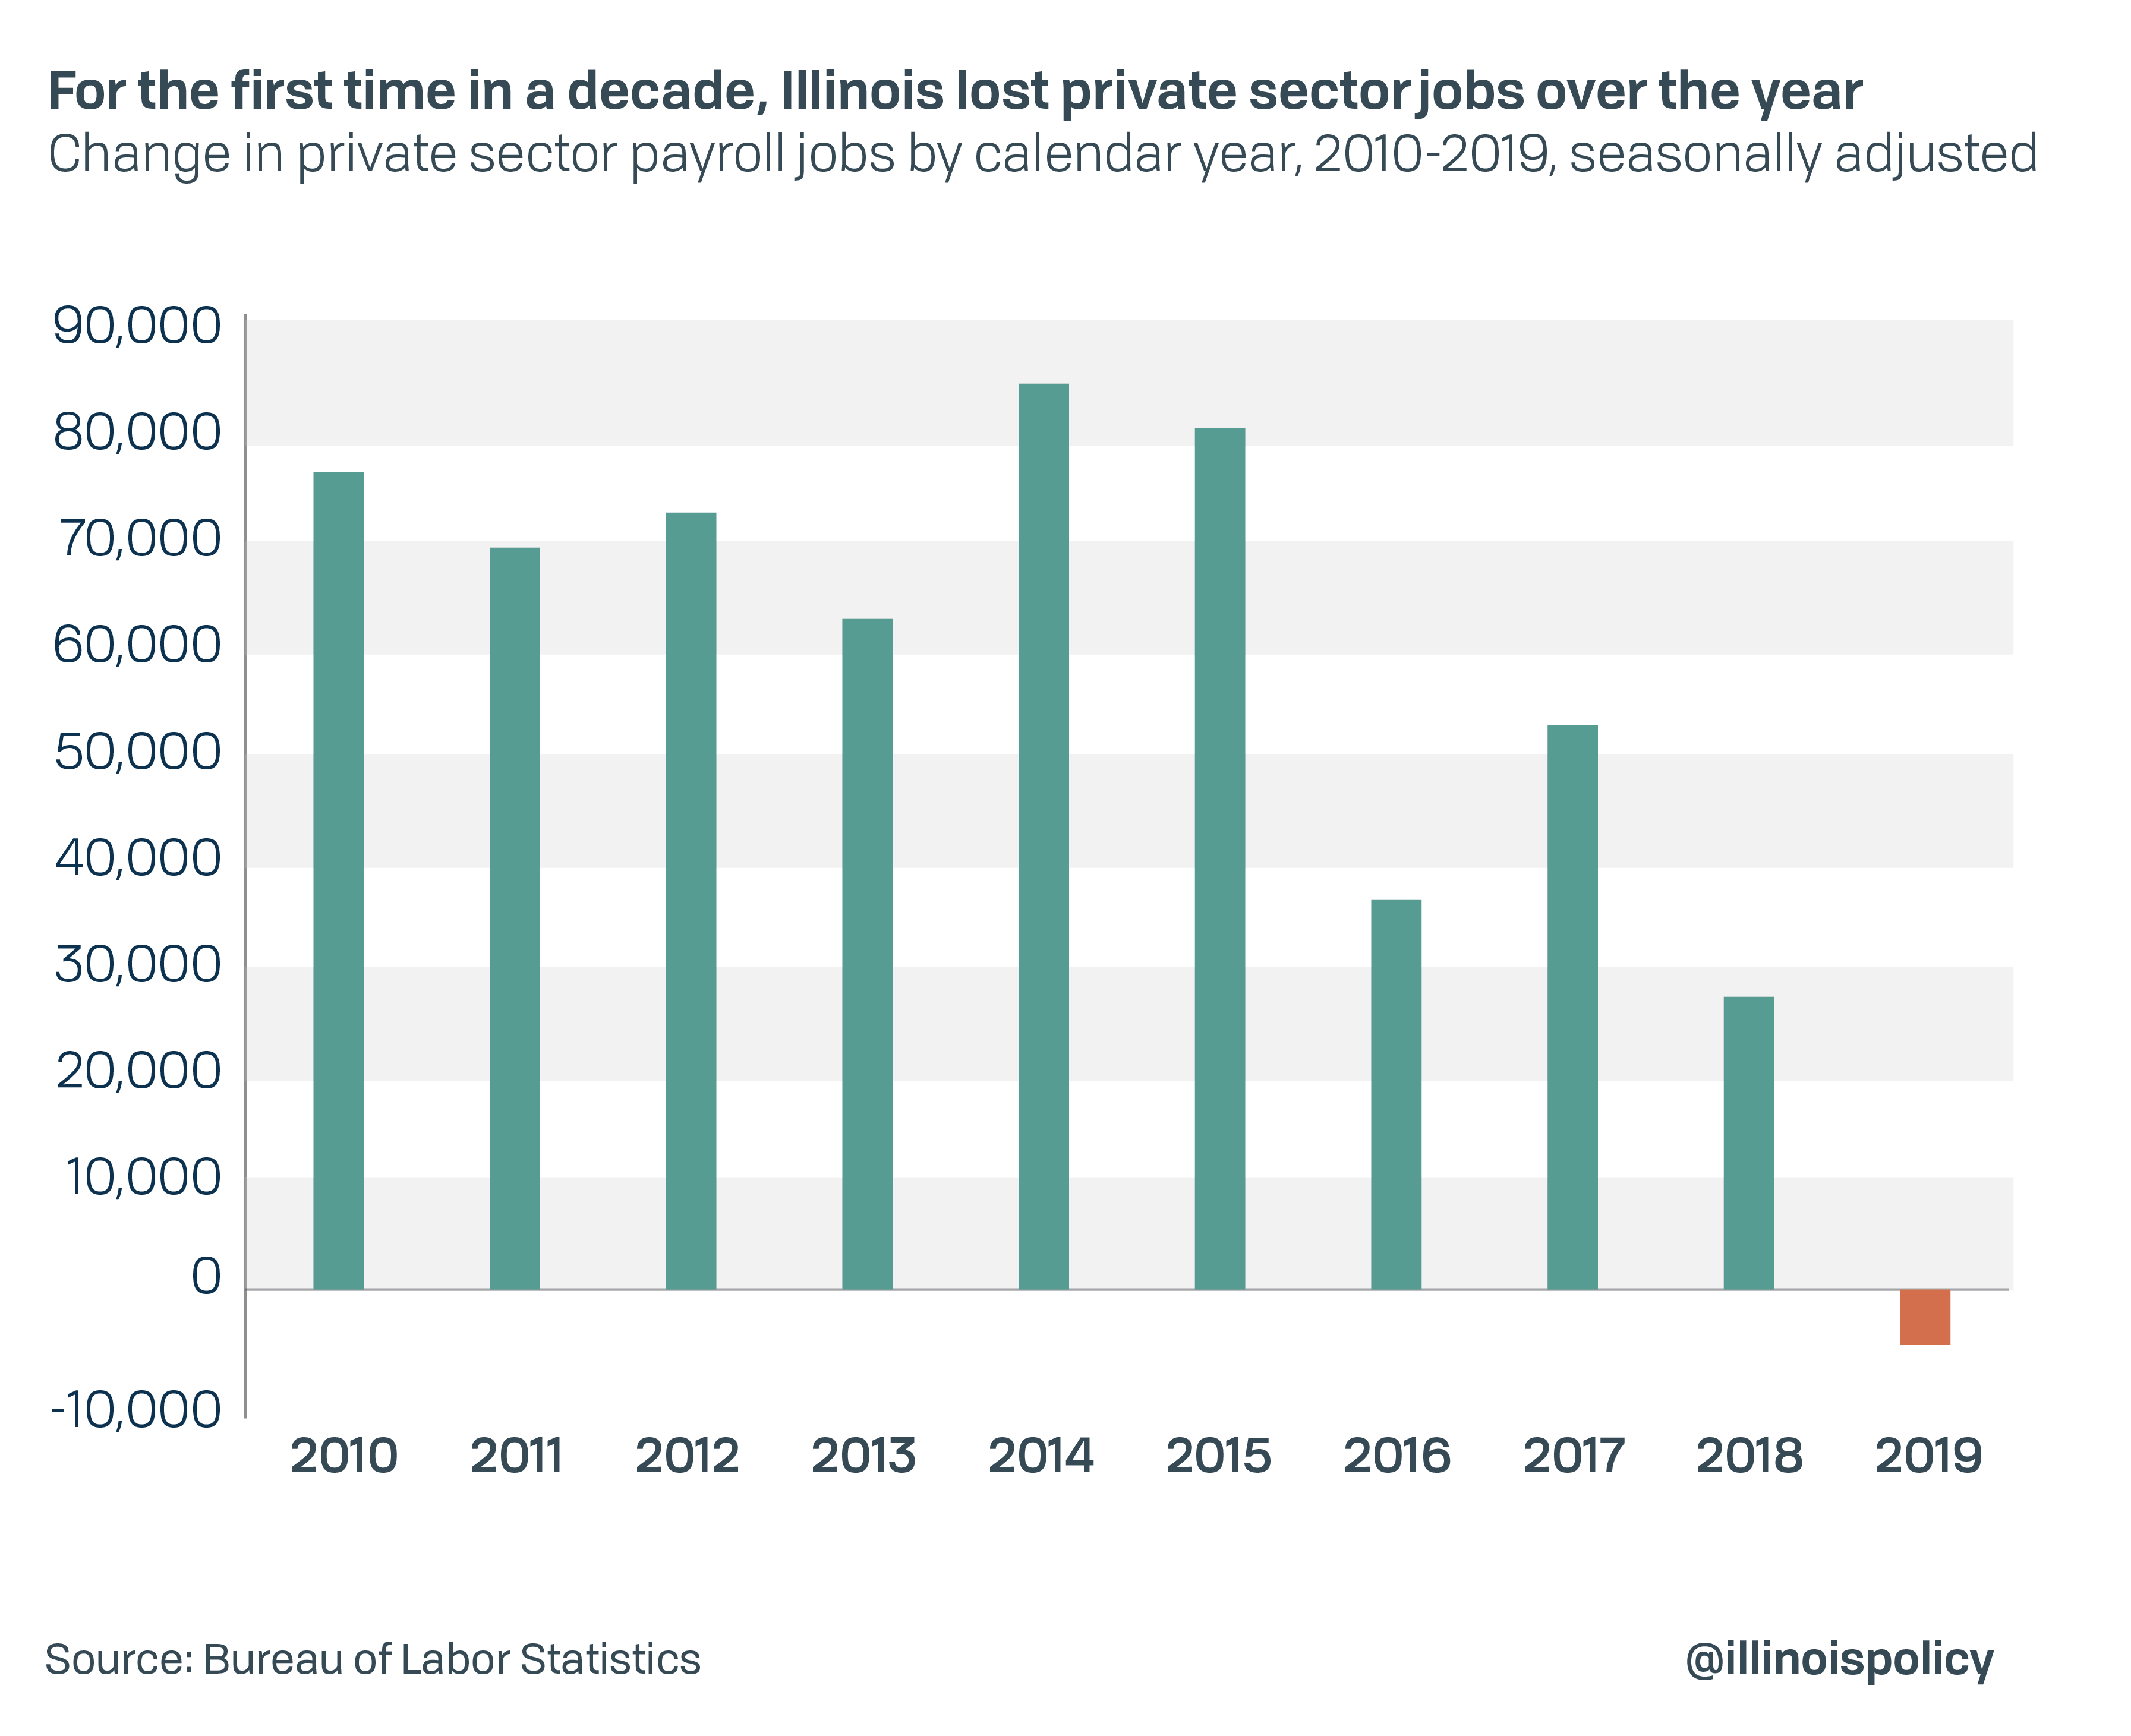 For the first time in a decade, Illinois lost private sector jobs over the year